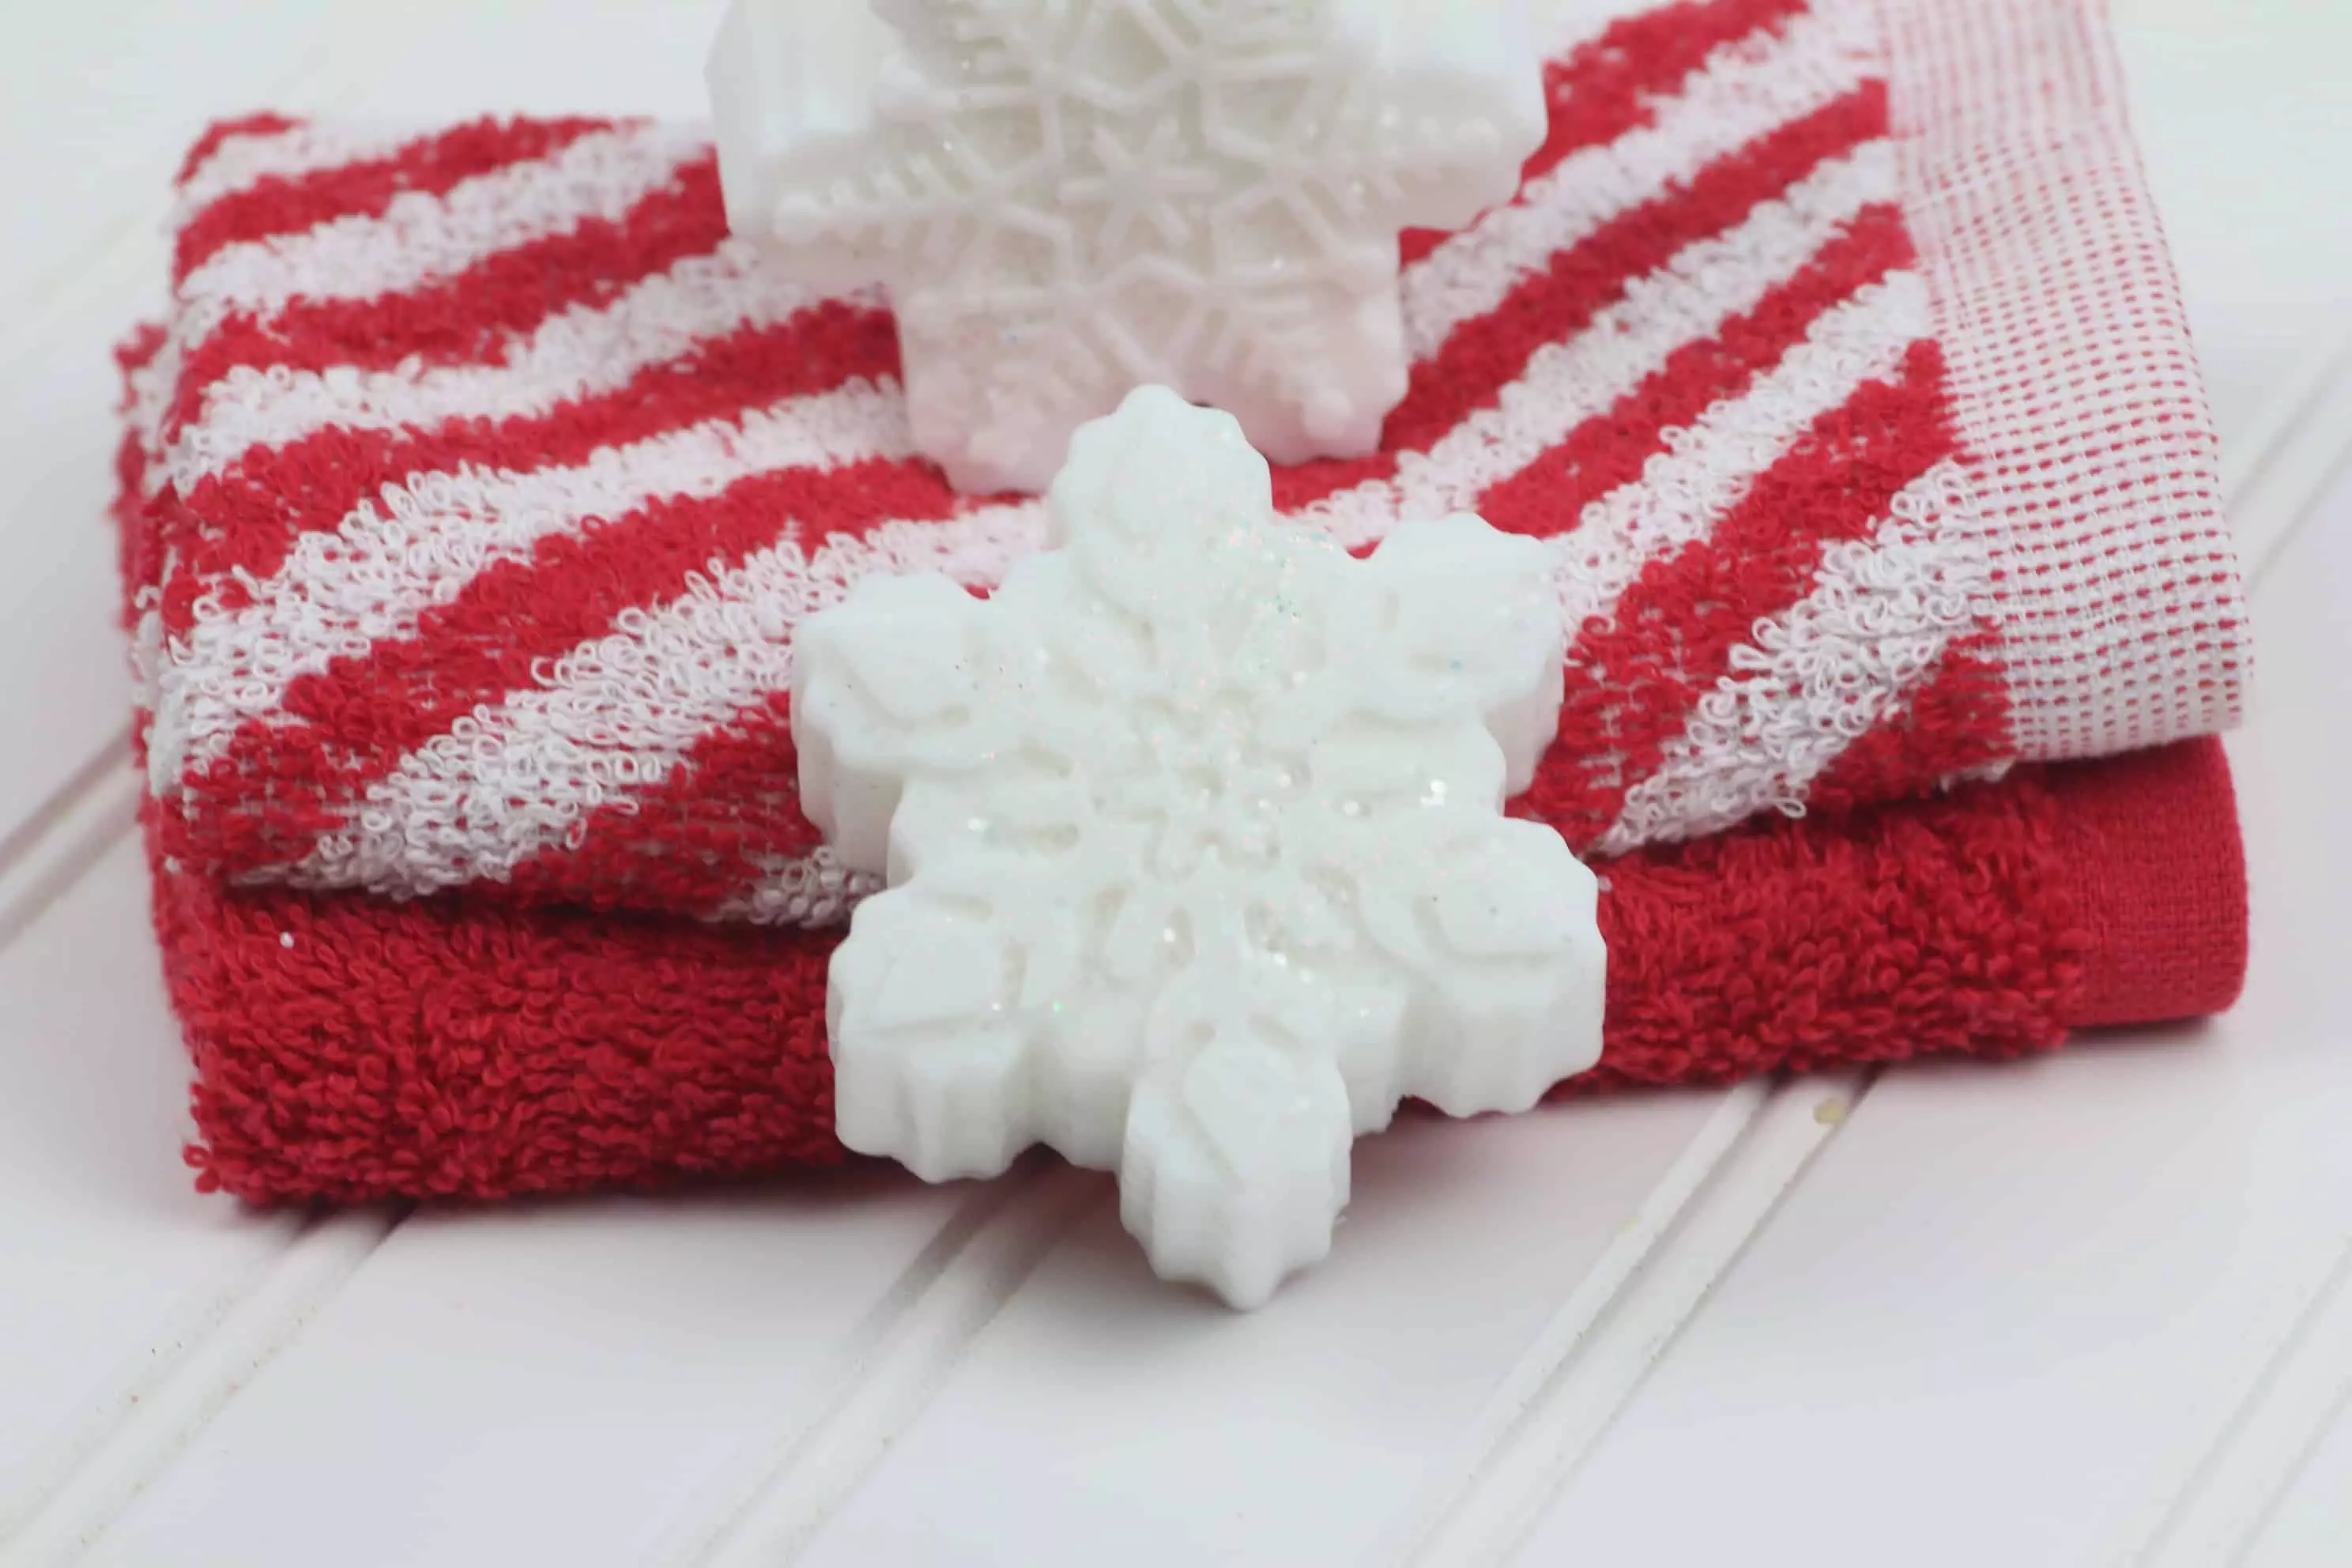 snowflake DIY soap bar on red and white towels